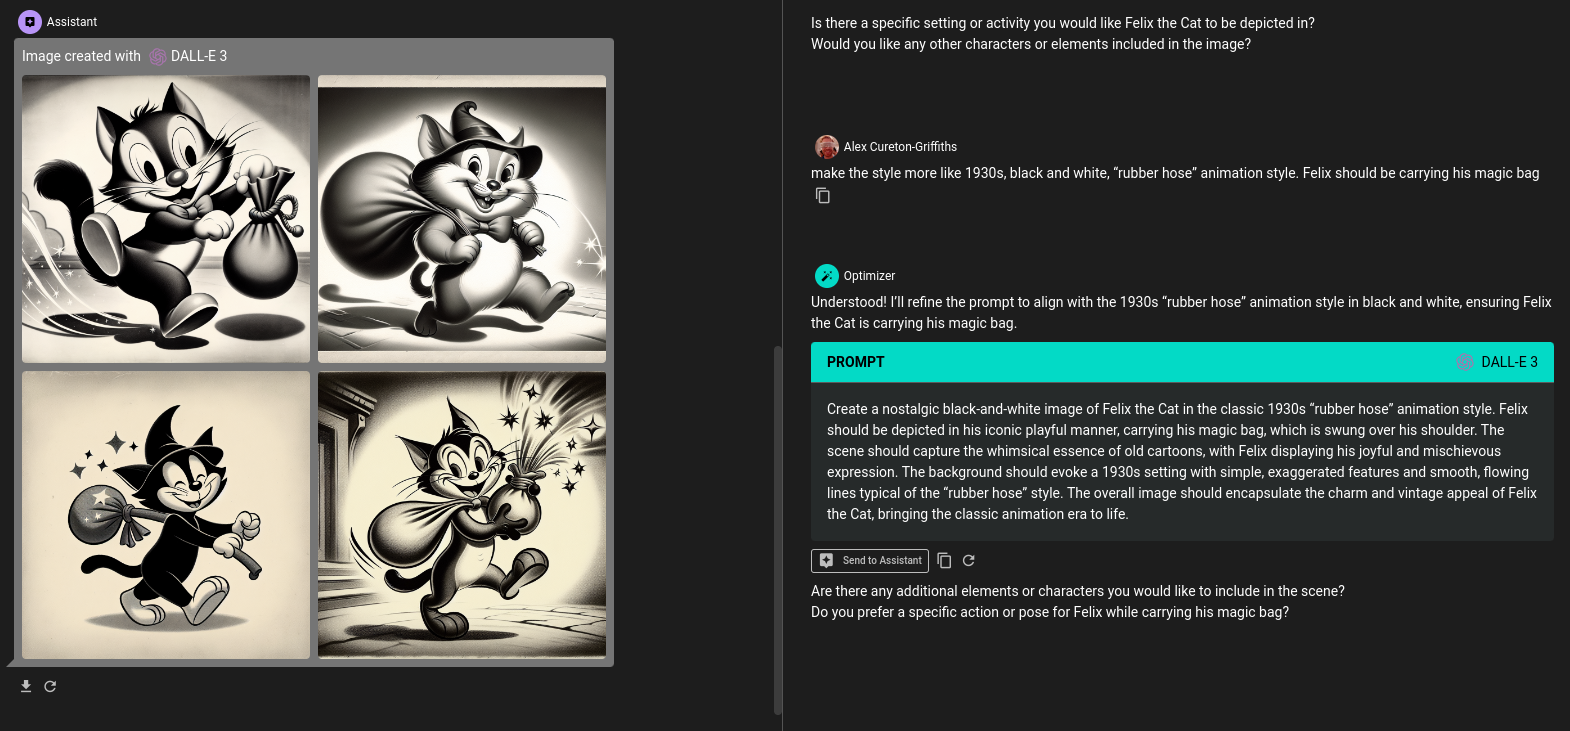 Screenshot of an artistic request page for creating a Felix the Cat illustration in the 1930s rubber hose animation style, em